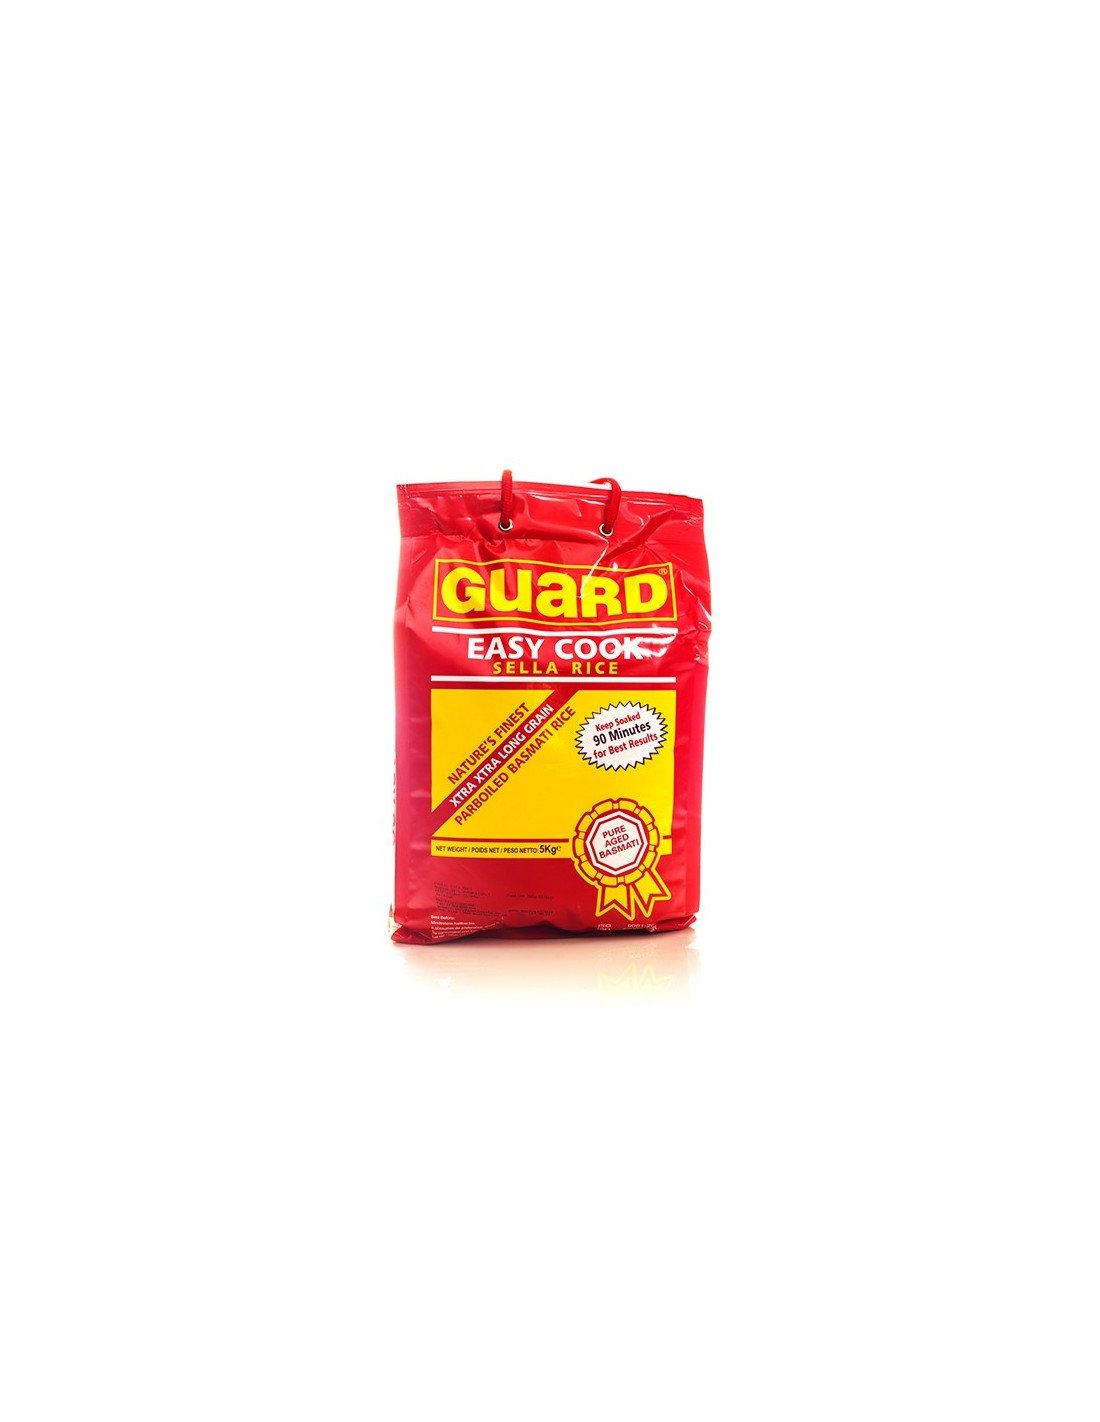 GUARD EASY COOK 1121 SELLA RICE 5kg